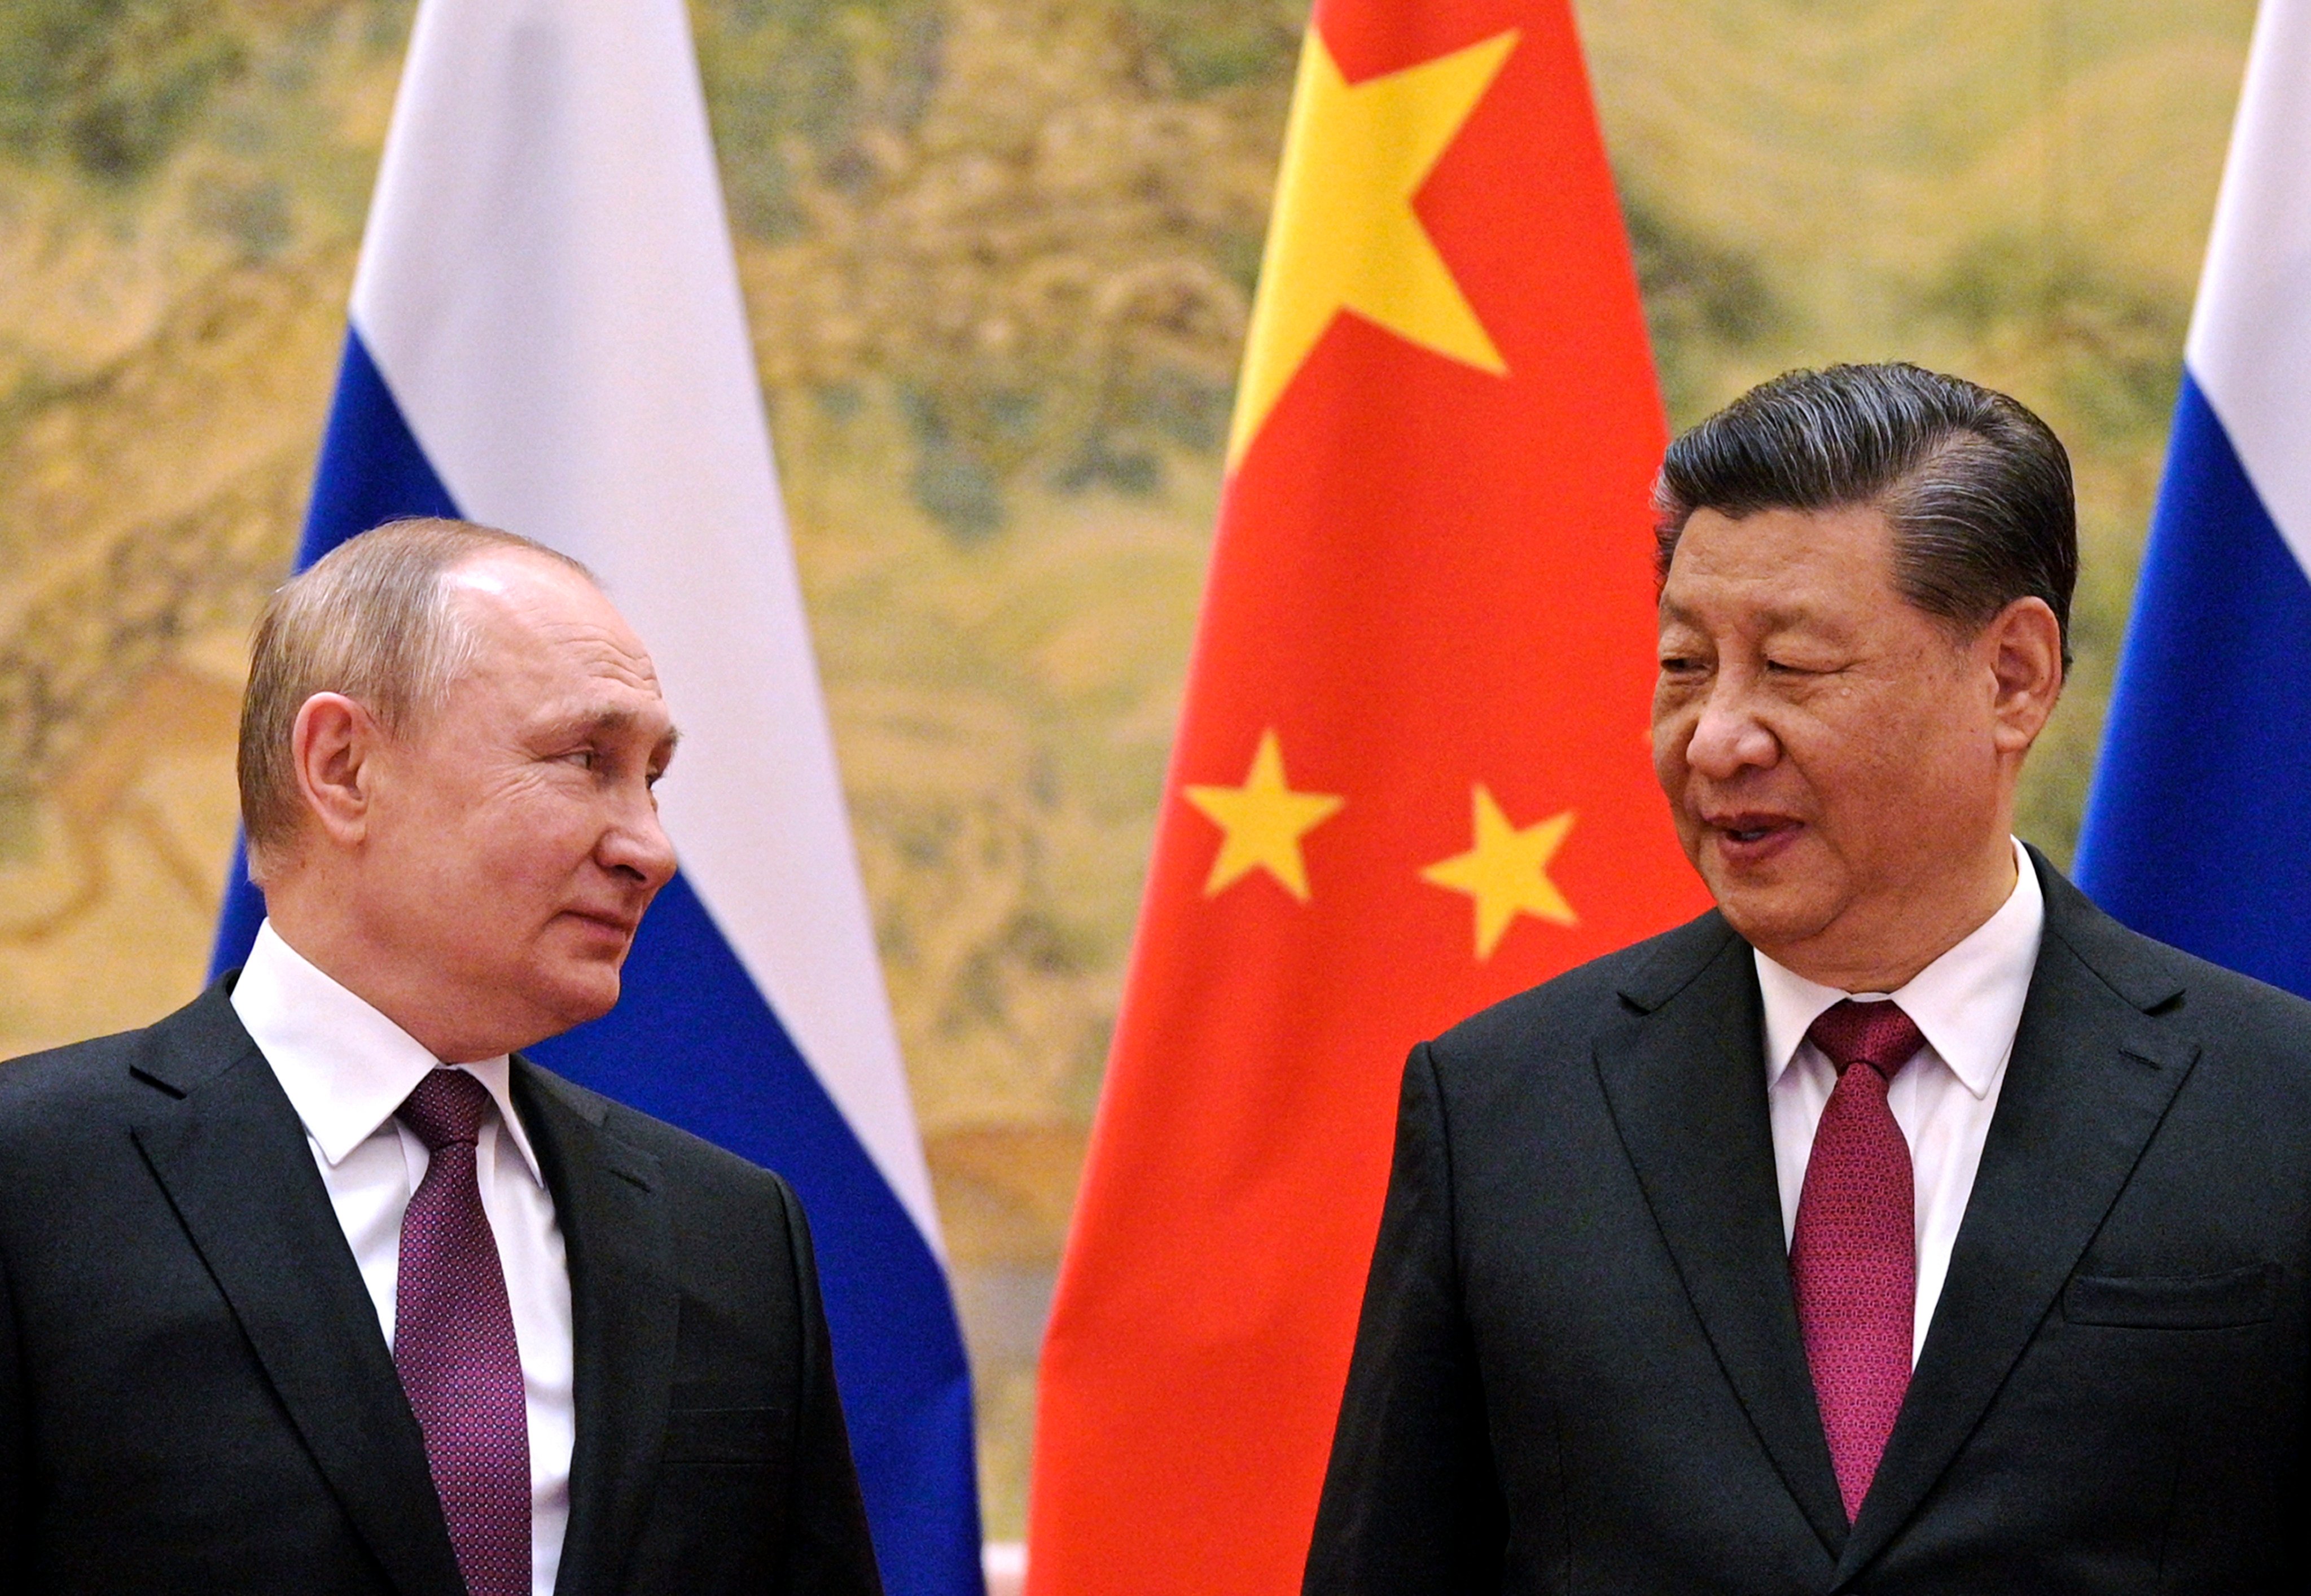 Russian President Vladimir Putin and Chinese President Xi Jinping have held multiple conversations in the past year, noted Ukrainian reserve colonel Kostyantyn Khivrenko. Photo: AP